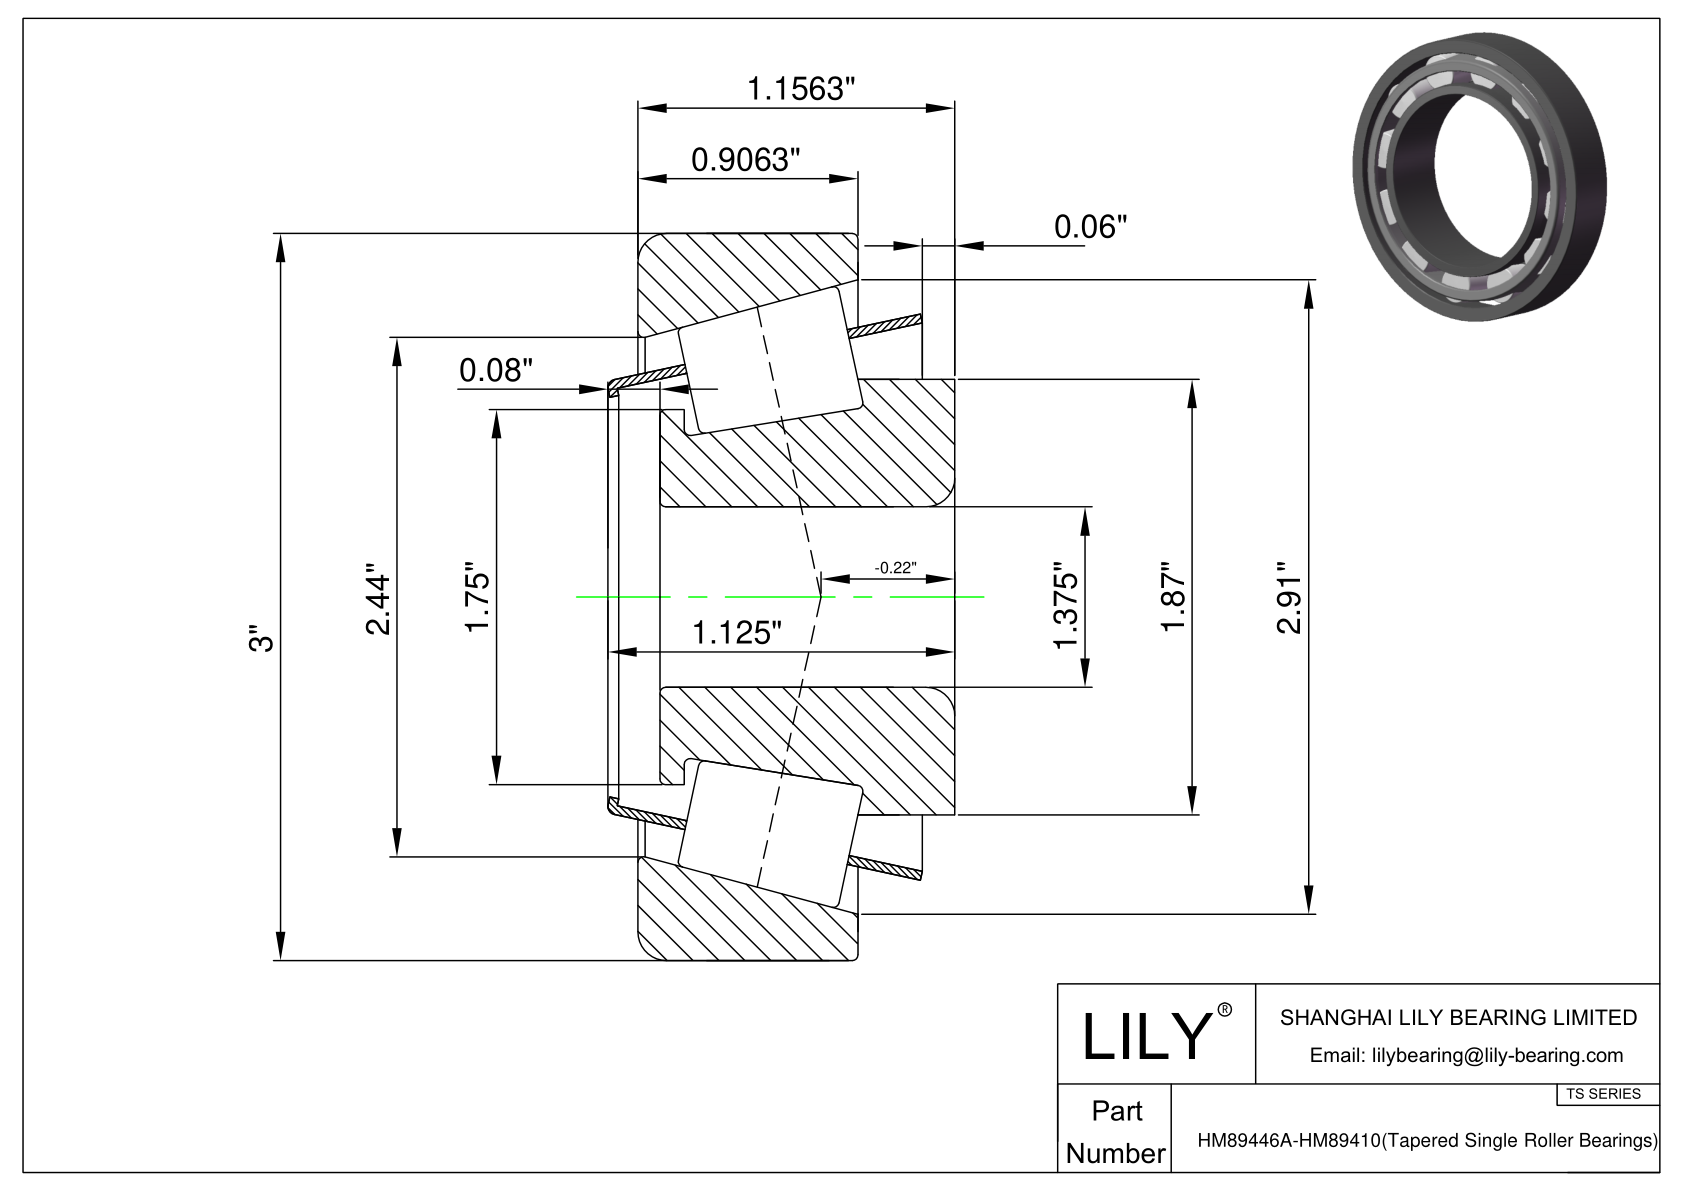 HM89446A-HM89410 TS (Tapered Single Roller Bearings) (Imperial) cad drawing